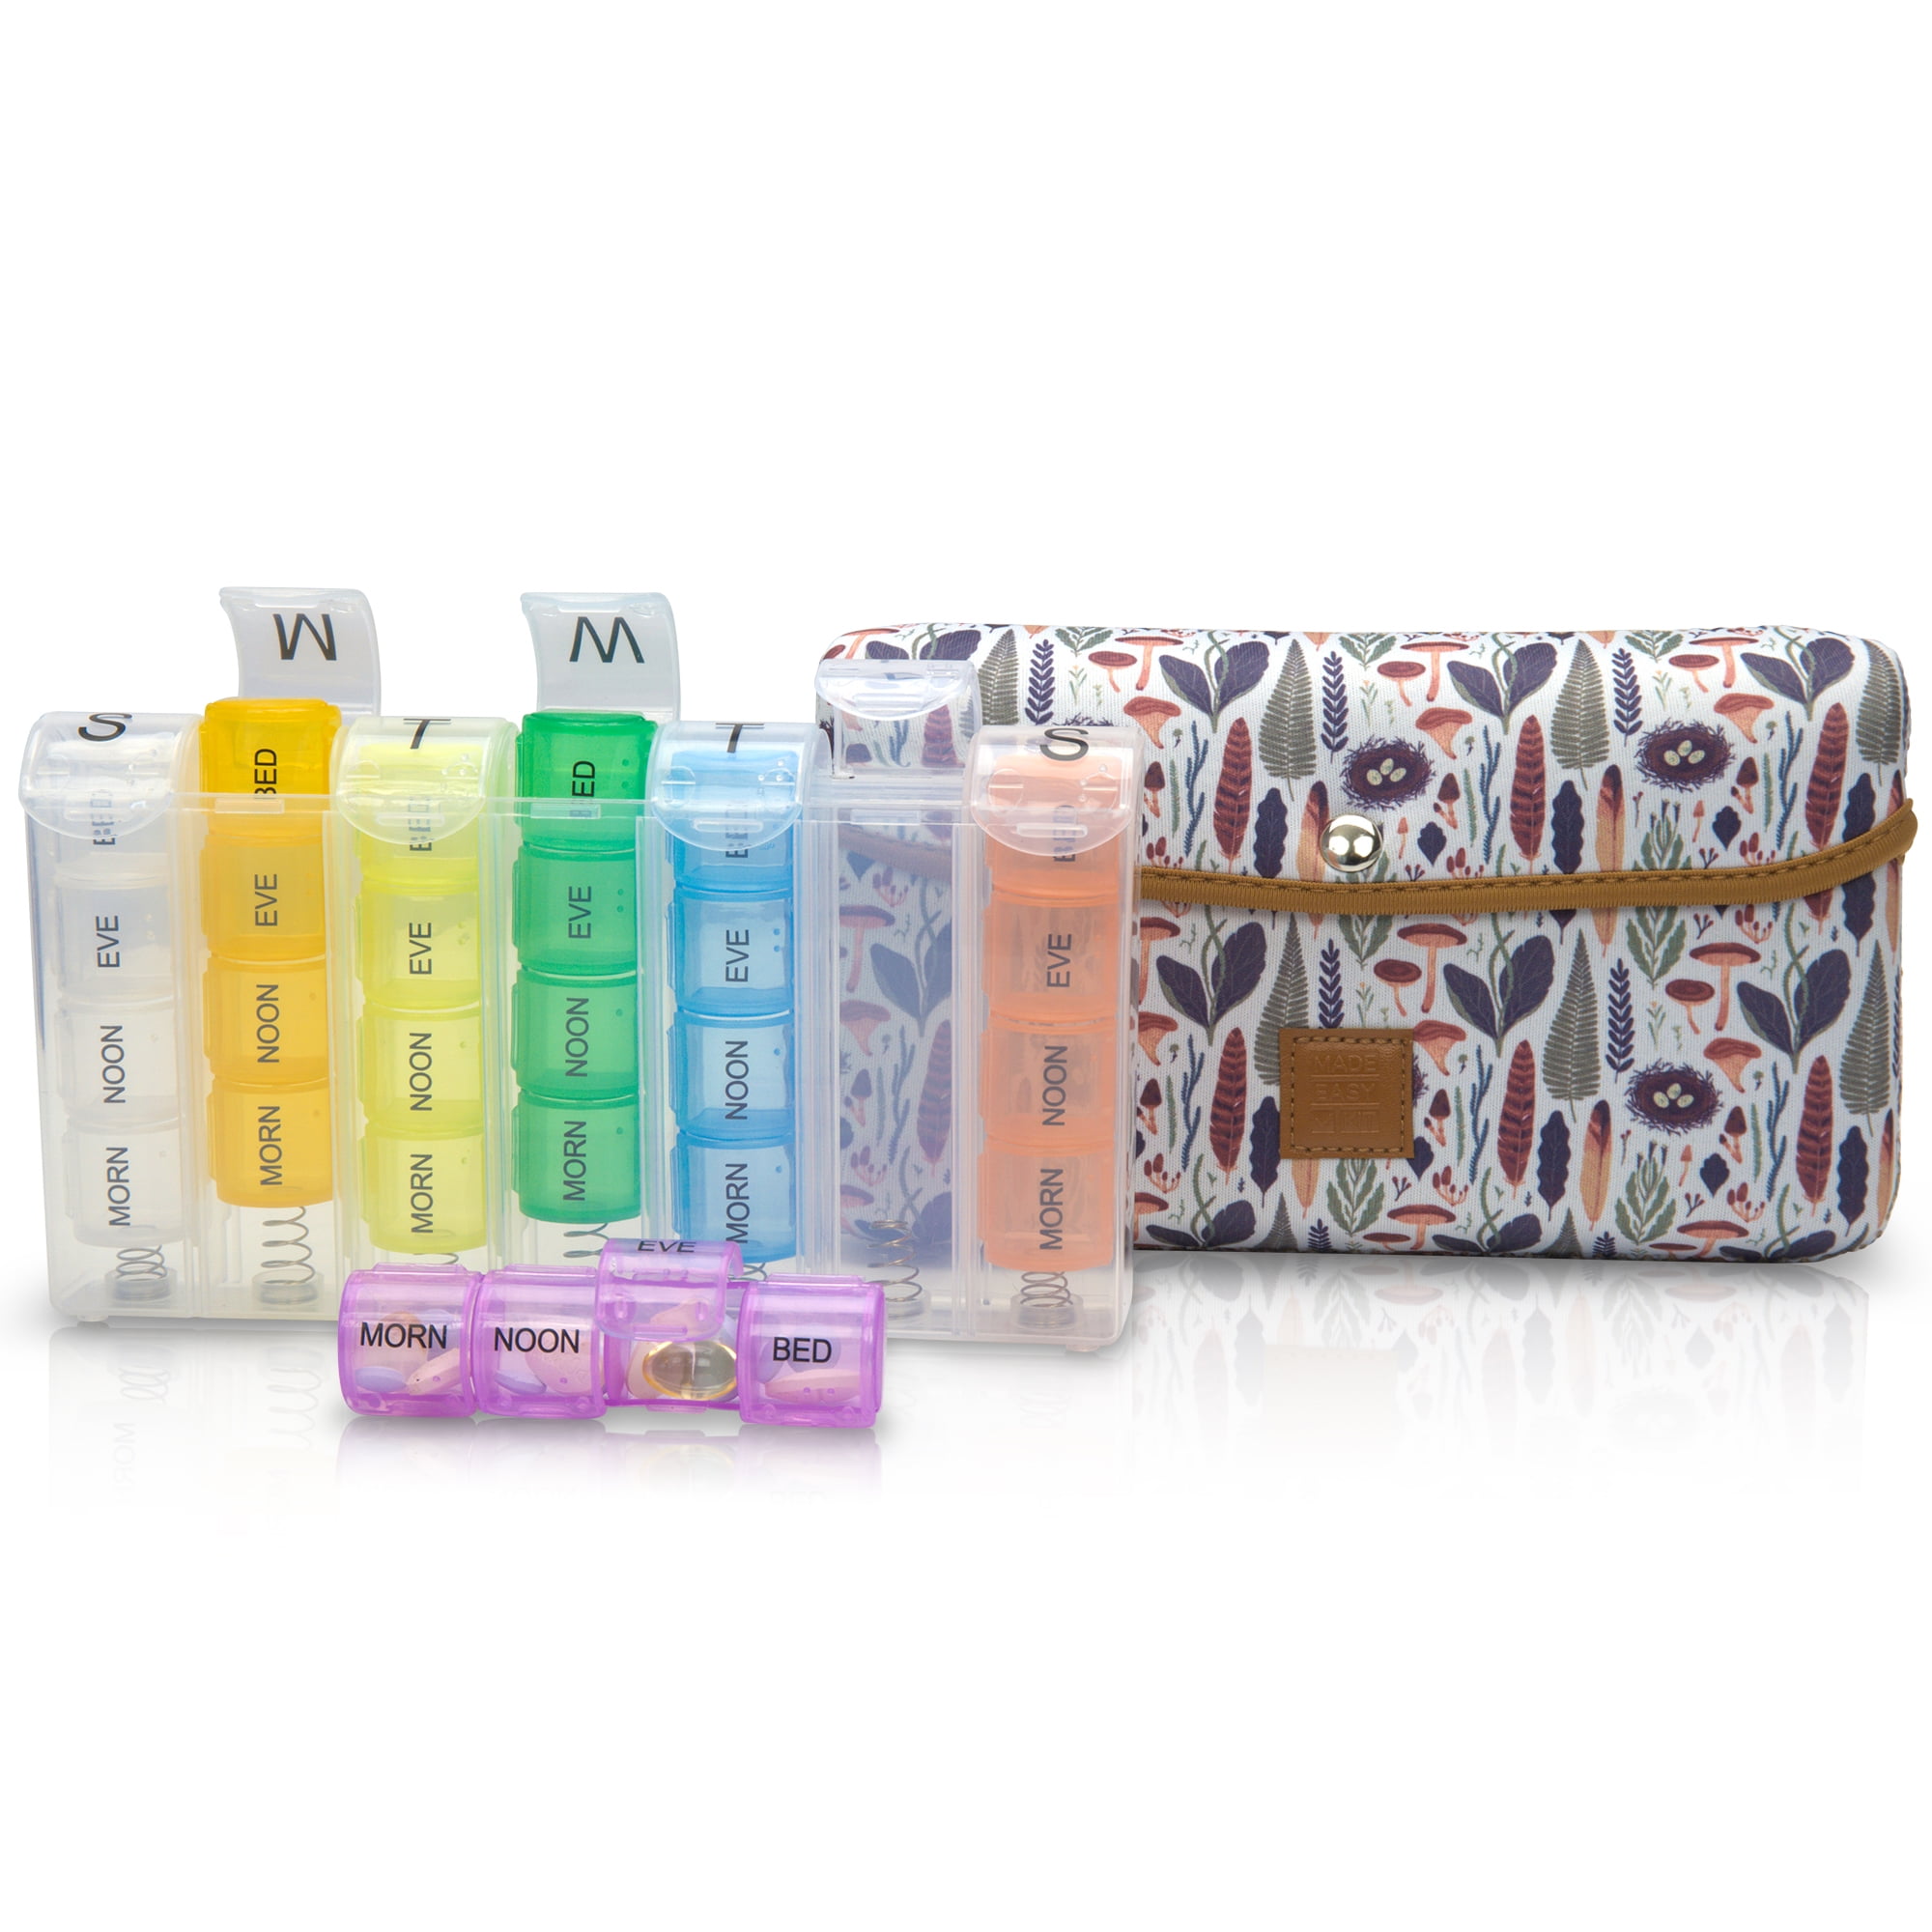 Made Easy Kit Pill Case Large 7-Day / 28 Compartments in Neoprene Carrier with Storage Pill Box in Daily in Morn, Noon, Eve, Bed A Weekly Vitamin, Med